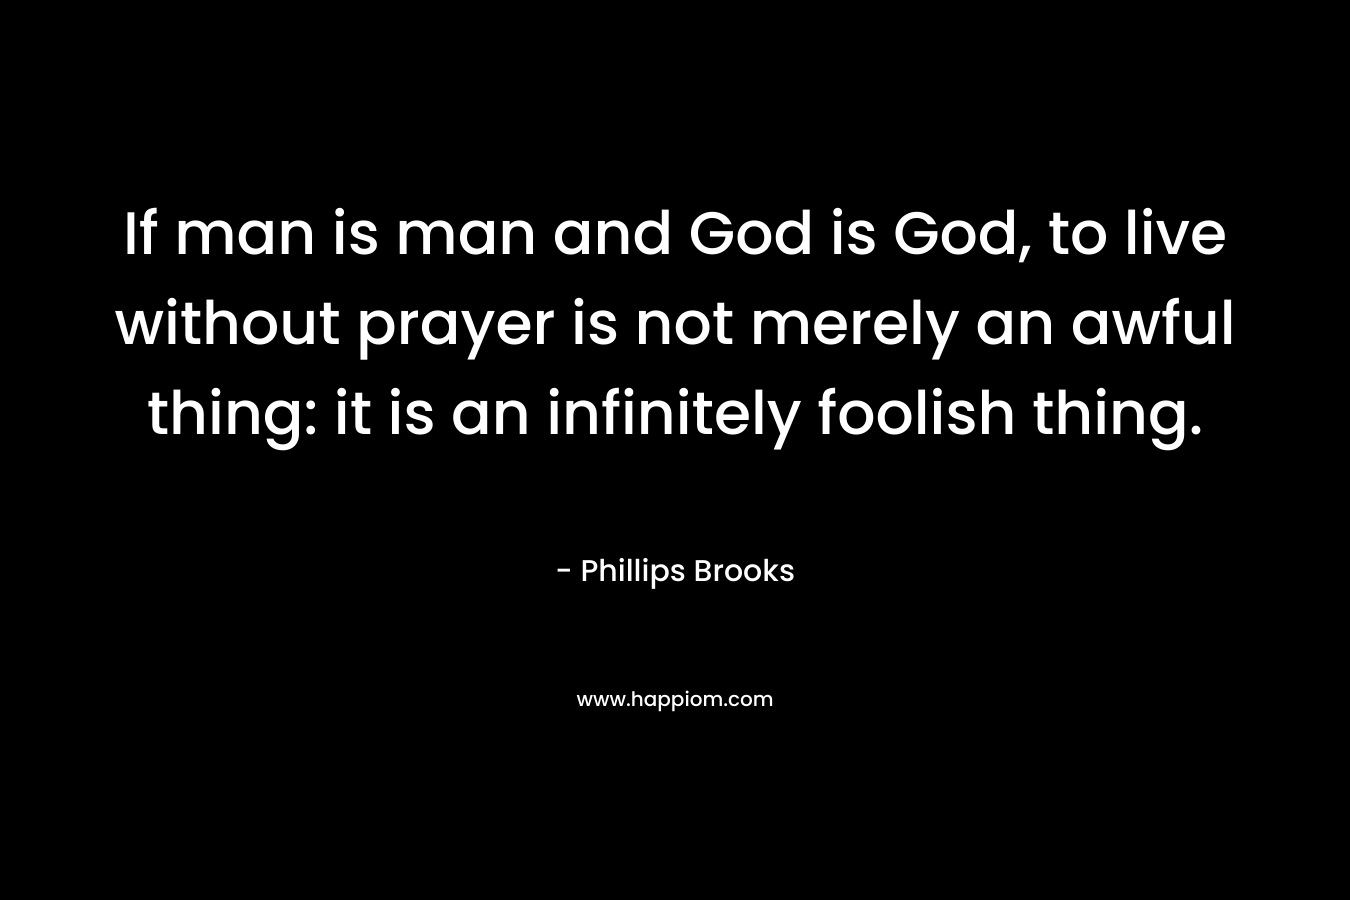 If man is man and God is God, to live without prayer is not merely an awful thing: it is an infinitely foolish thing.